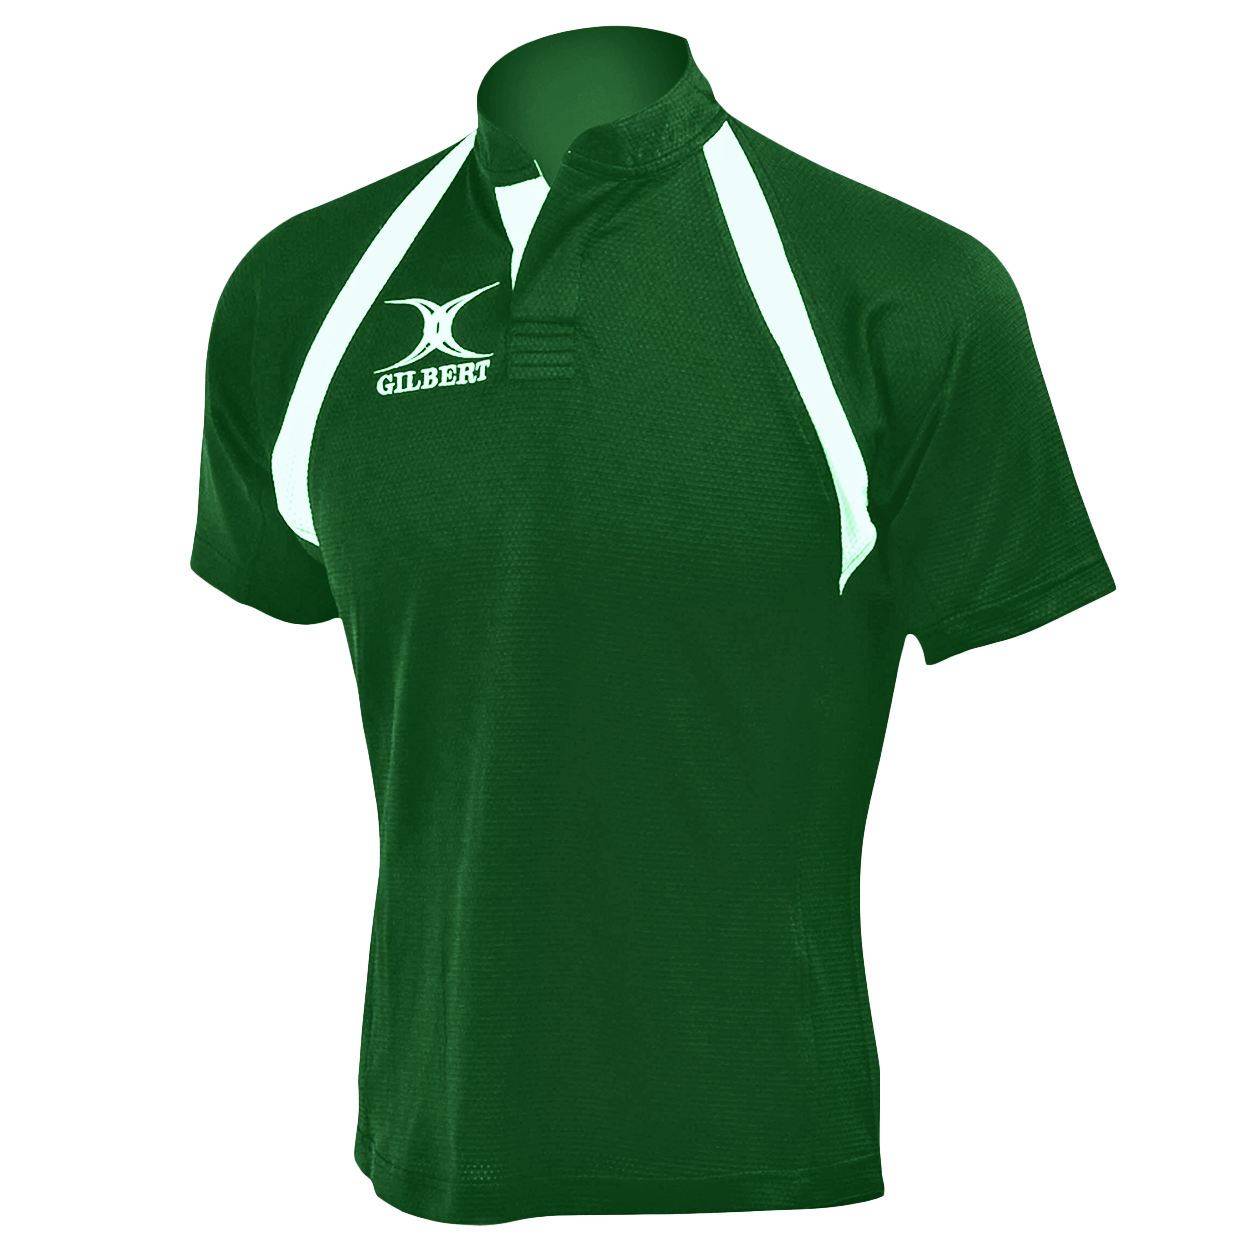 Rugby Imports Gilbert Lightweight Match Rugby Jersey